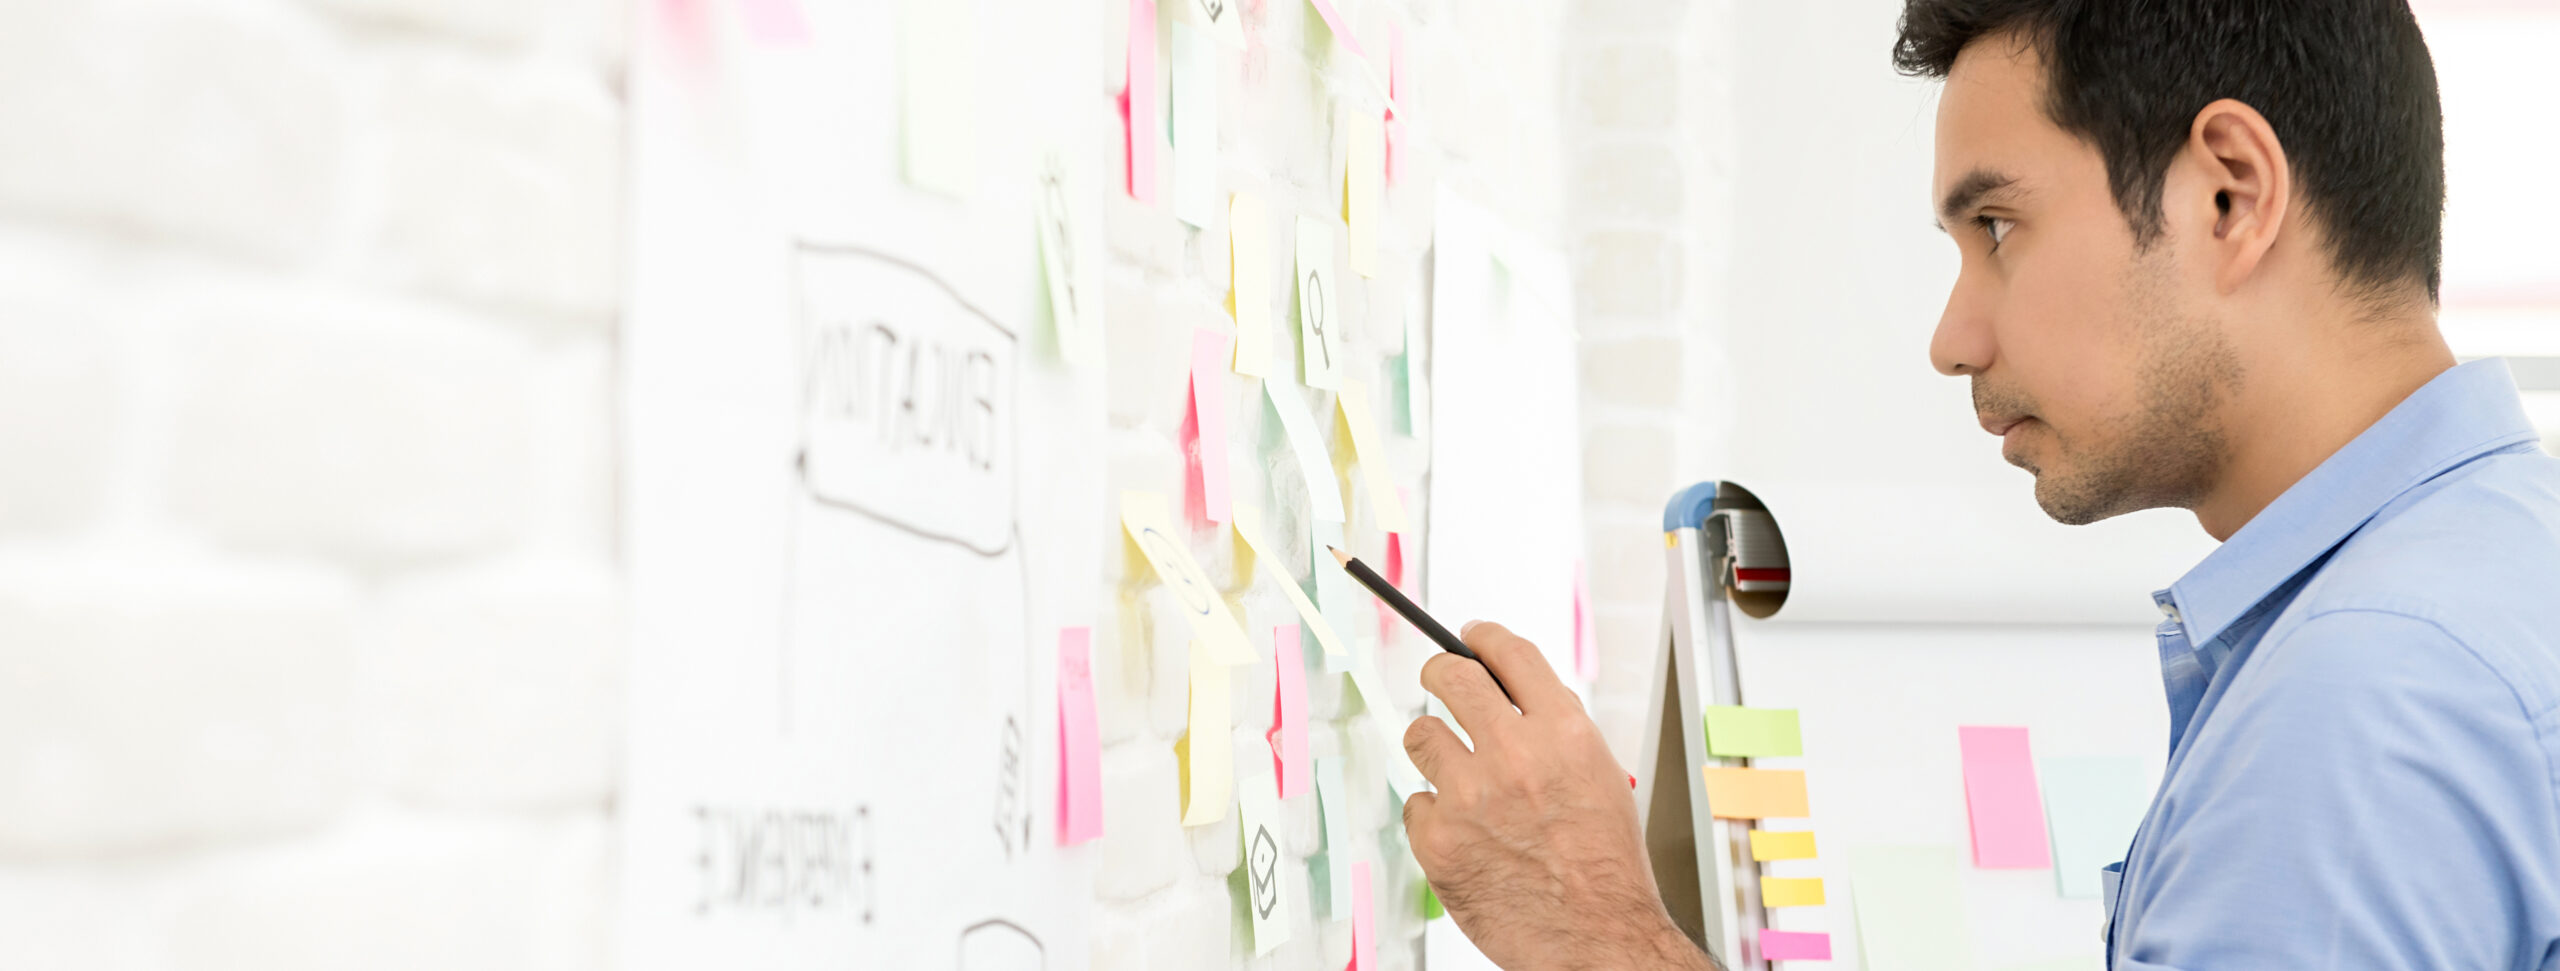 Businessman looking for information from sticky notes on the wall